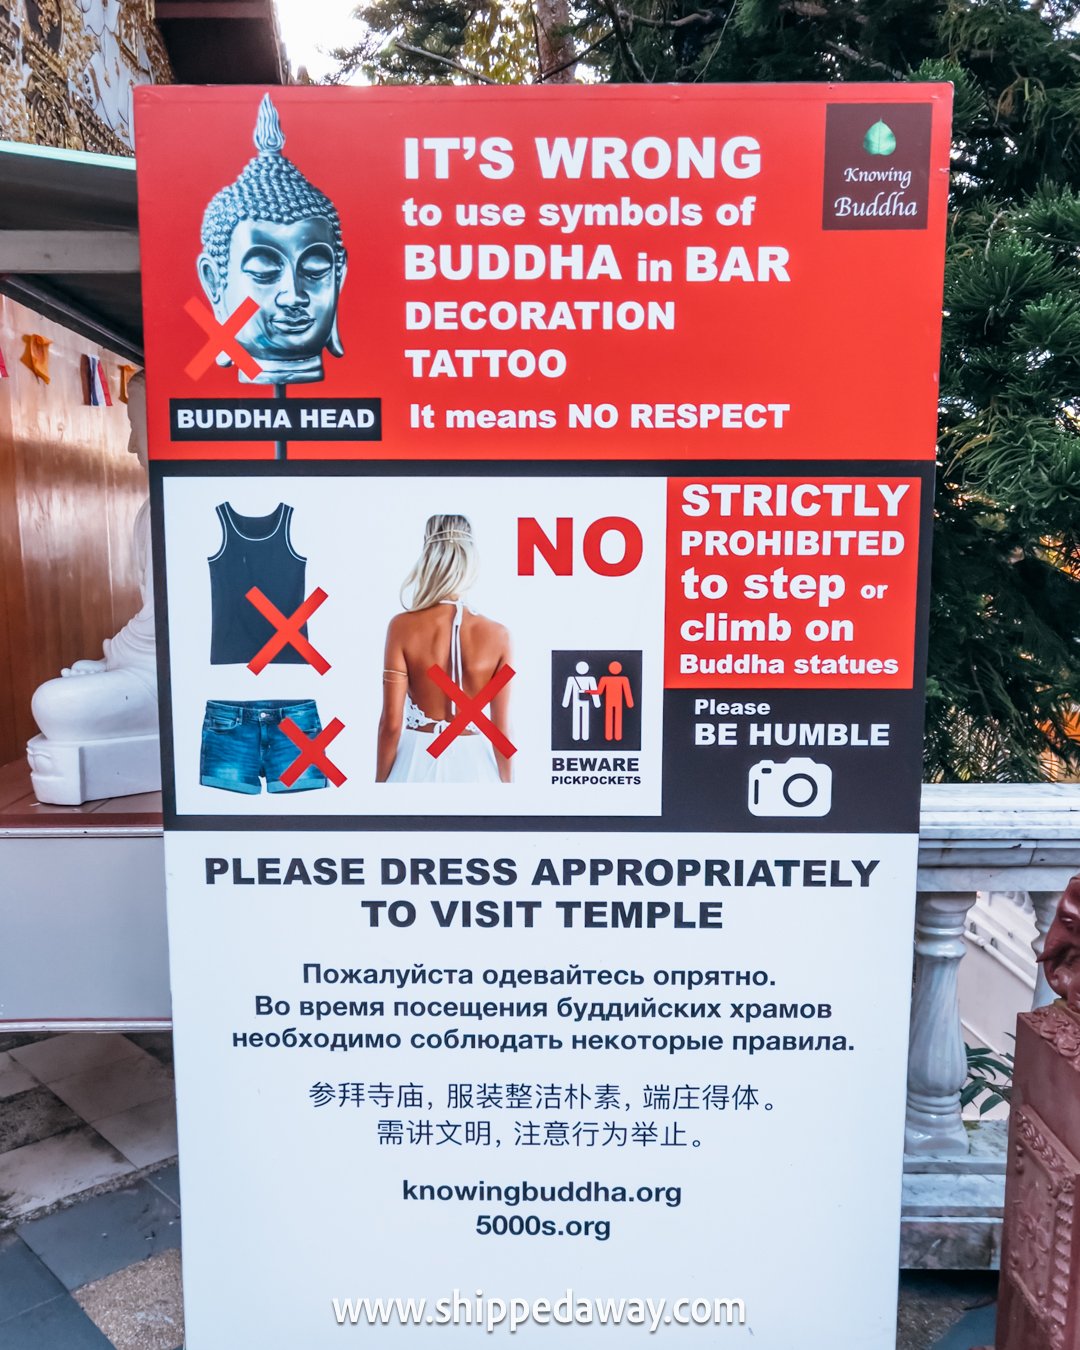 Dresscode and forbidden things at Wat Phra That Doi Suthep - Doi Suthep Temple Chiang Mai, Thailand - Travel Guide to Doi Suthep Temple